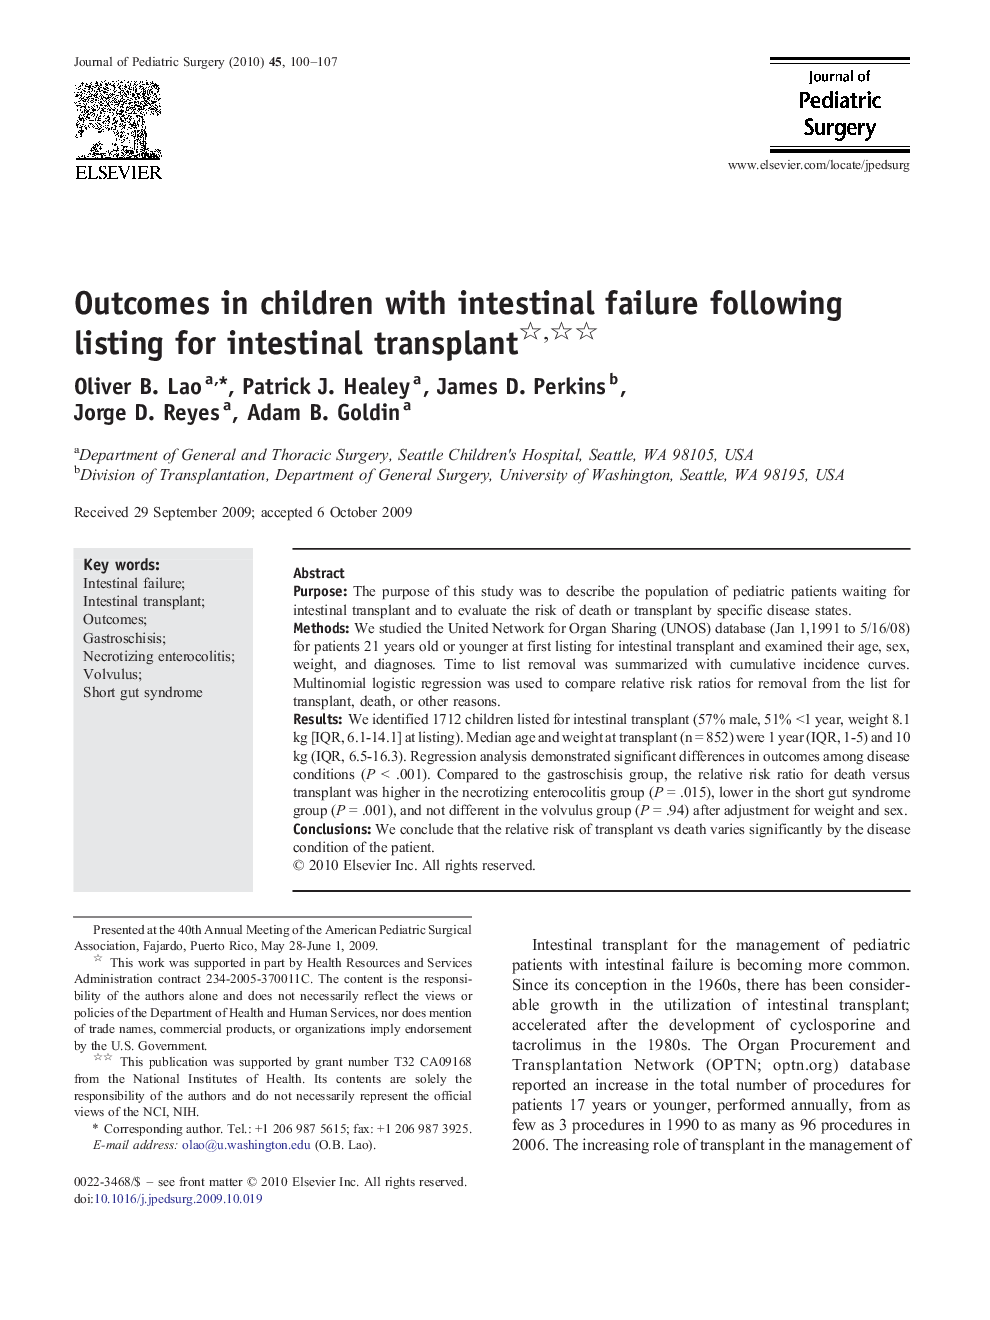 Outcomes in children with intestinal failure following listing for intestinal transplant 